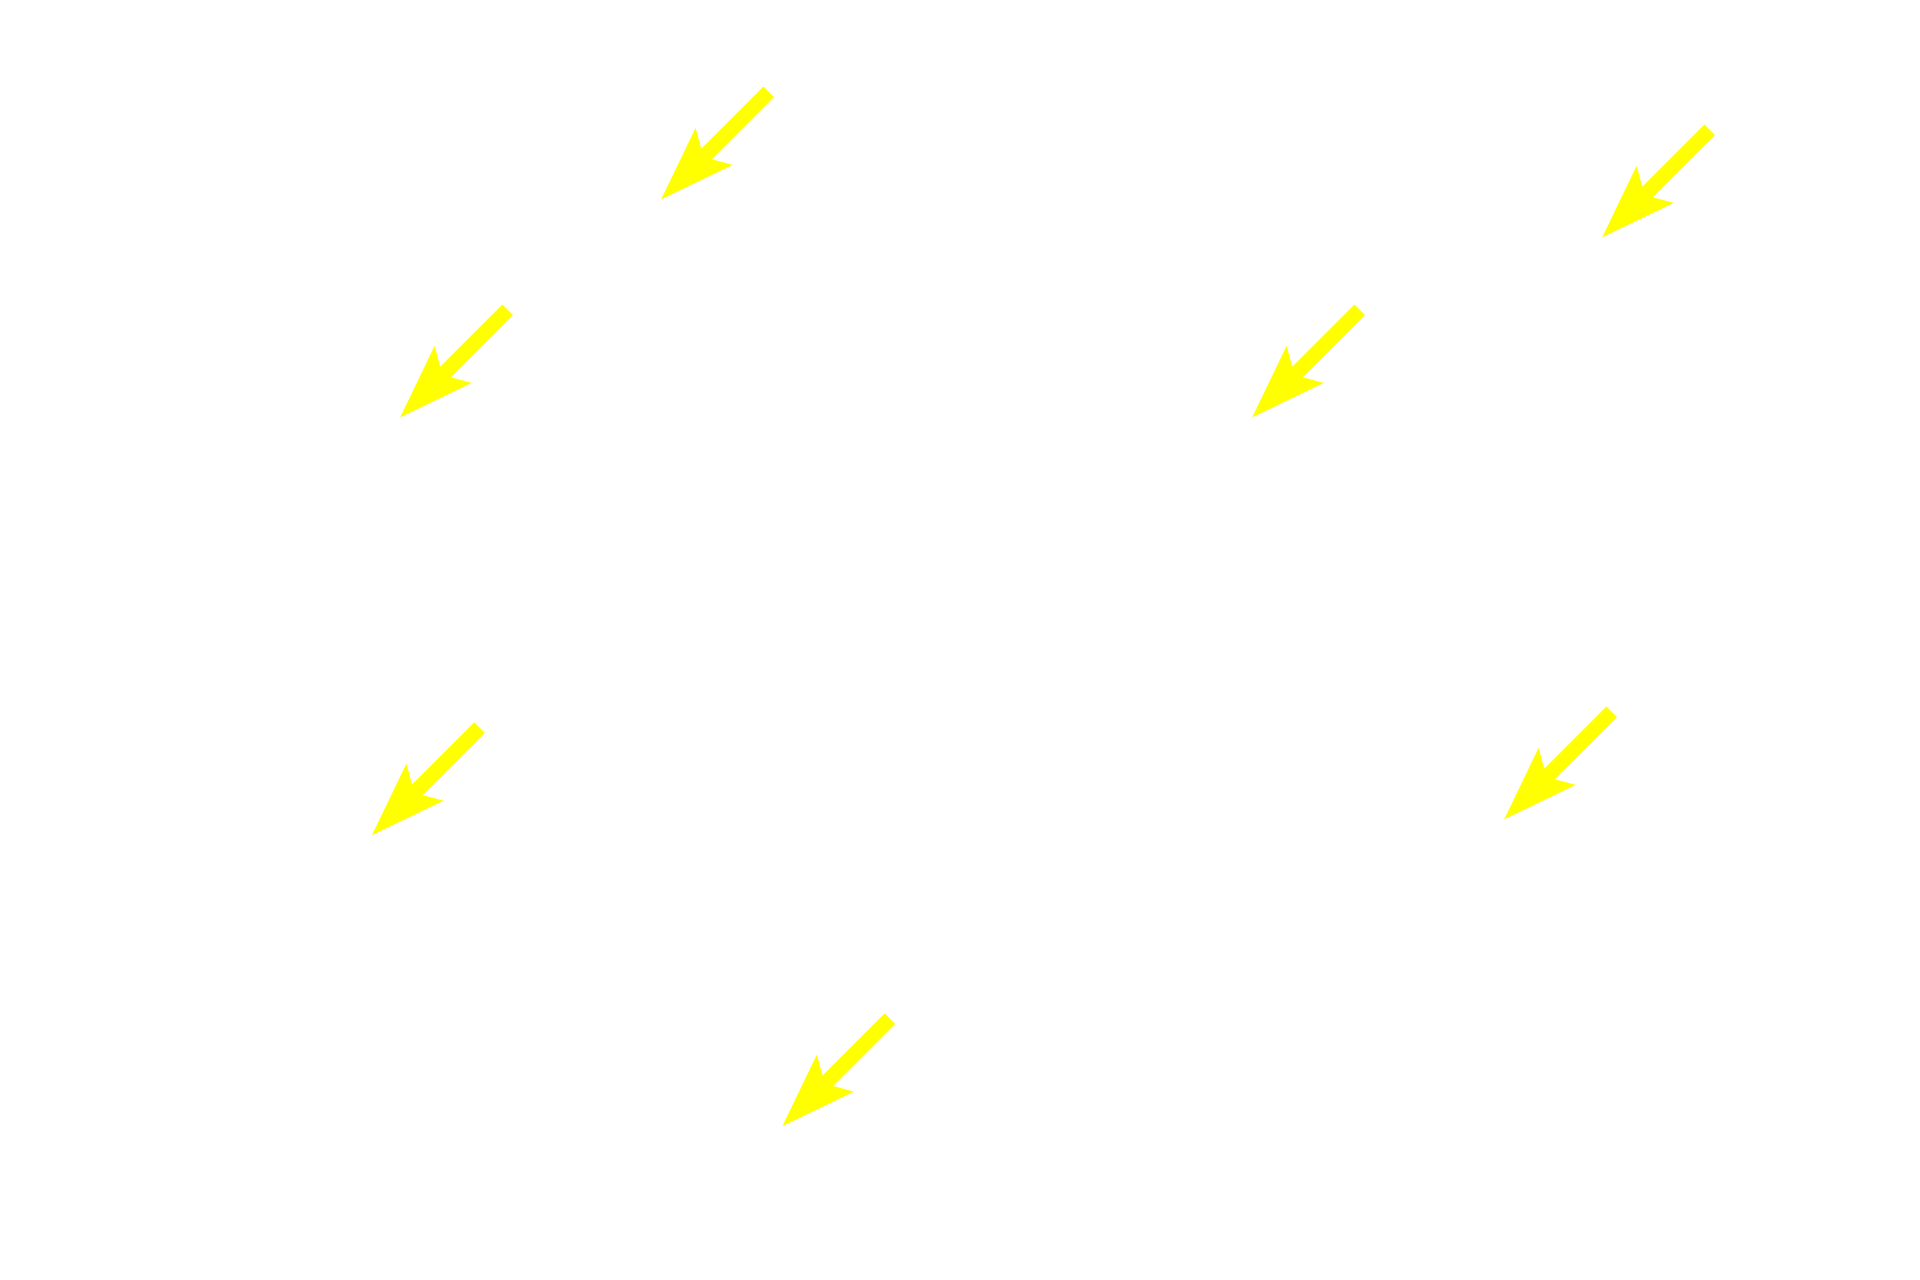 Multipolar neurons <p>These multipolar neurons are located in an autonomic ganglion in the sympathetic division of the autonomic nervous system.  Sympathetic ganglia are generally located at some distance from the organs they innervate and contain large numbers of both incoming preganglionic axons as well as exiting, efferent postganglionic axons from the multipolar neurons.  The neuron cell bodies are widely dispersed and extend numerous dendrites.  Eccentrically-located nuclei are common.  Satellite Schwann cells surround each neuronal in the ganglion.  Their cytoplasmic processes form a capsule around the cell body. 100x, 1000x</p>
